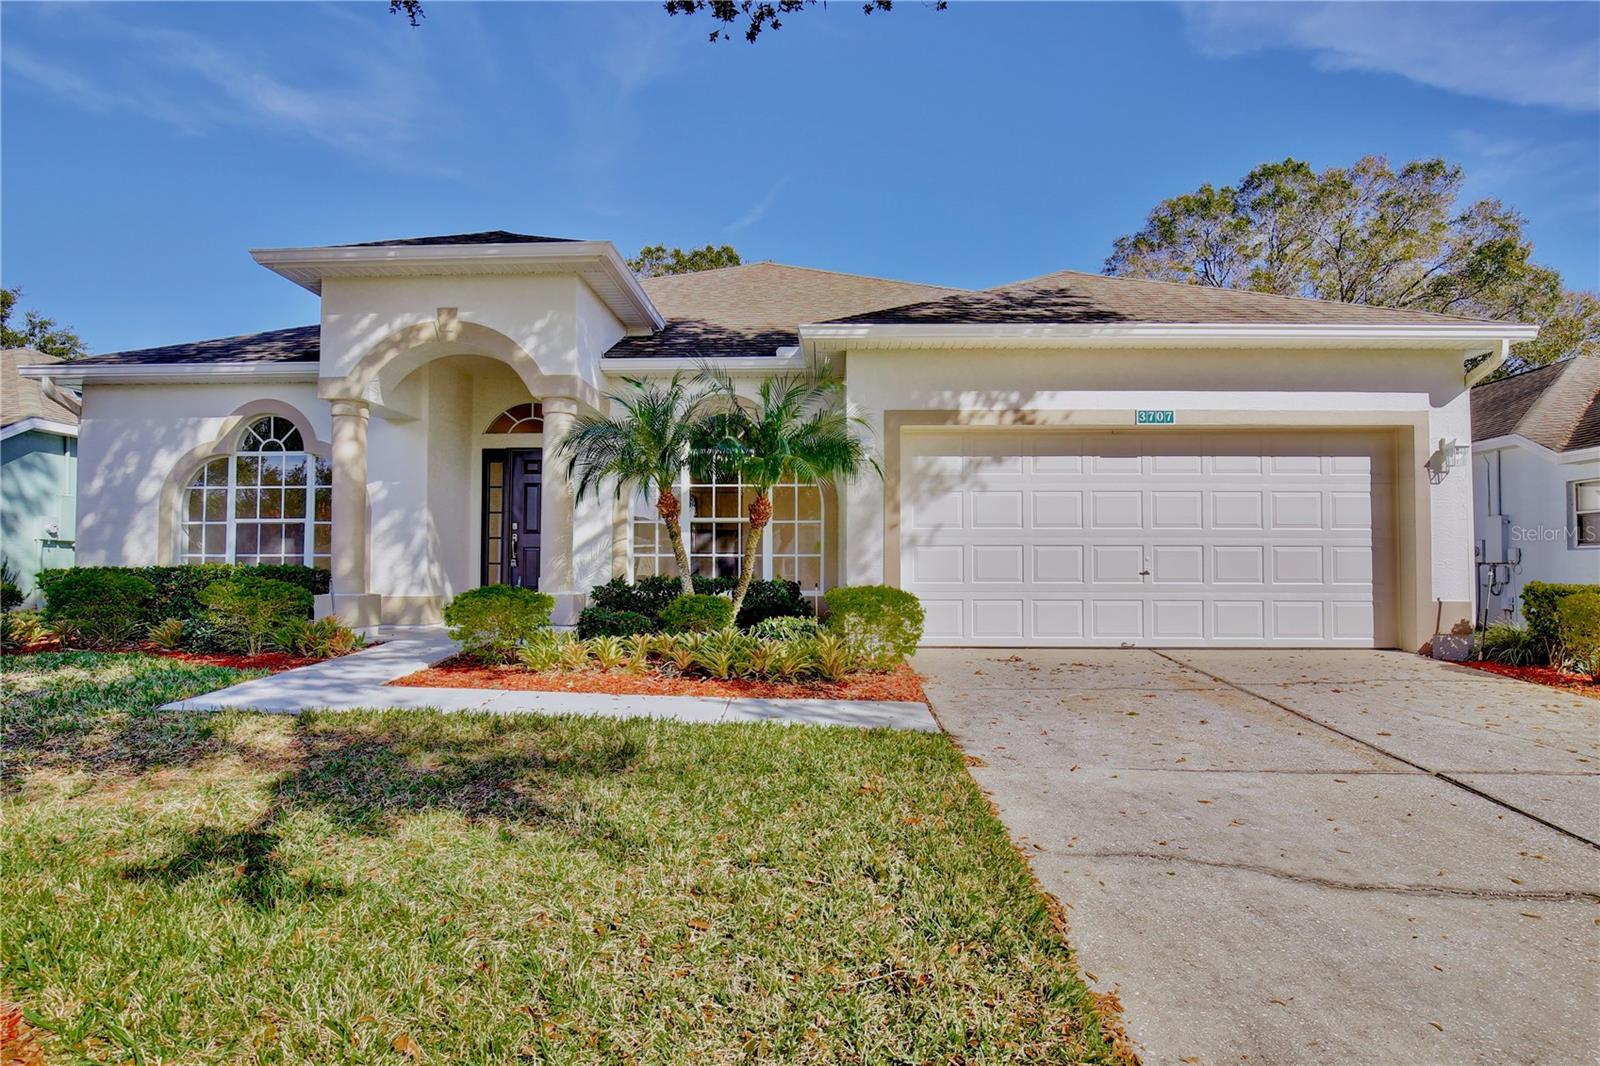 Photo one of 3707 Fairfield Dr Clermont FL 34711 | MLS G5077138